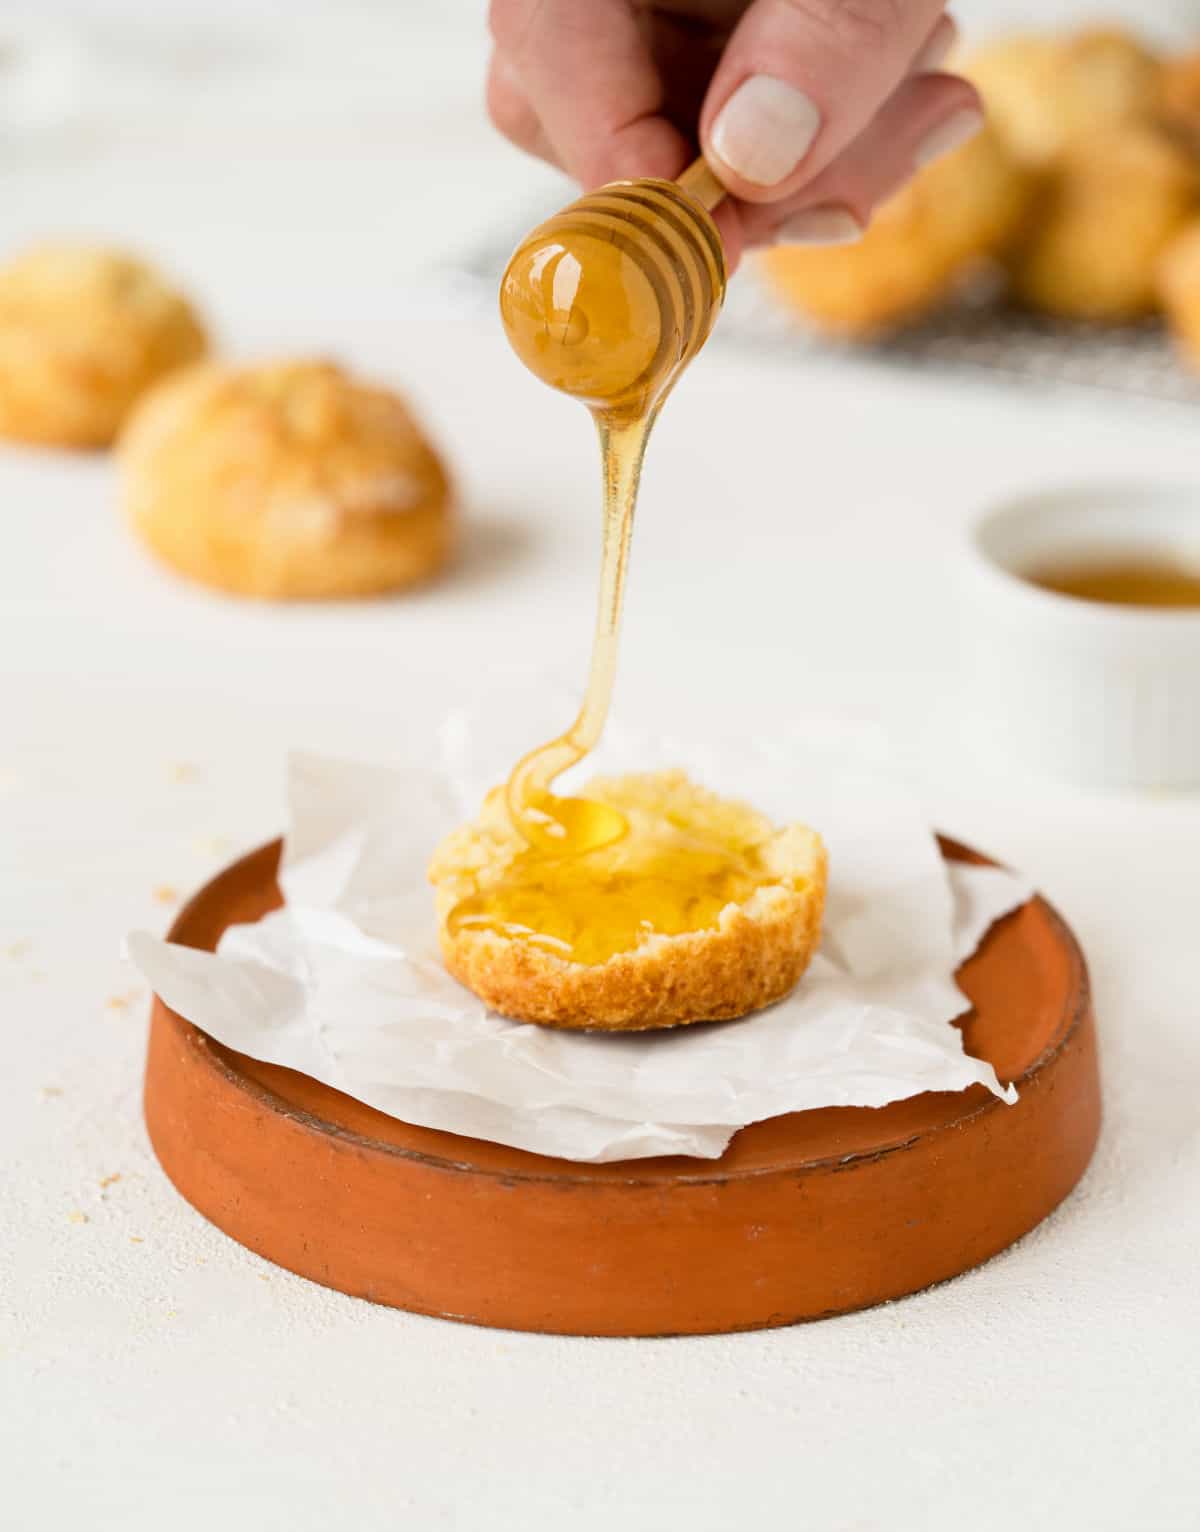 Honey being poured over half a scone on a orange plate. White surface.